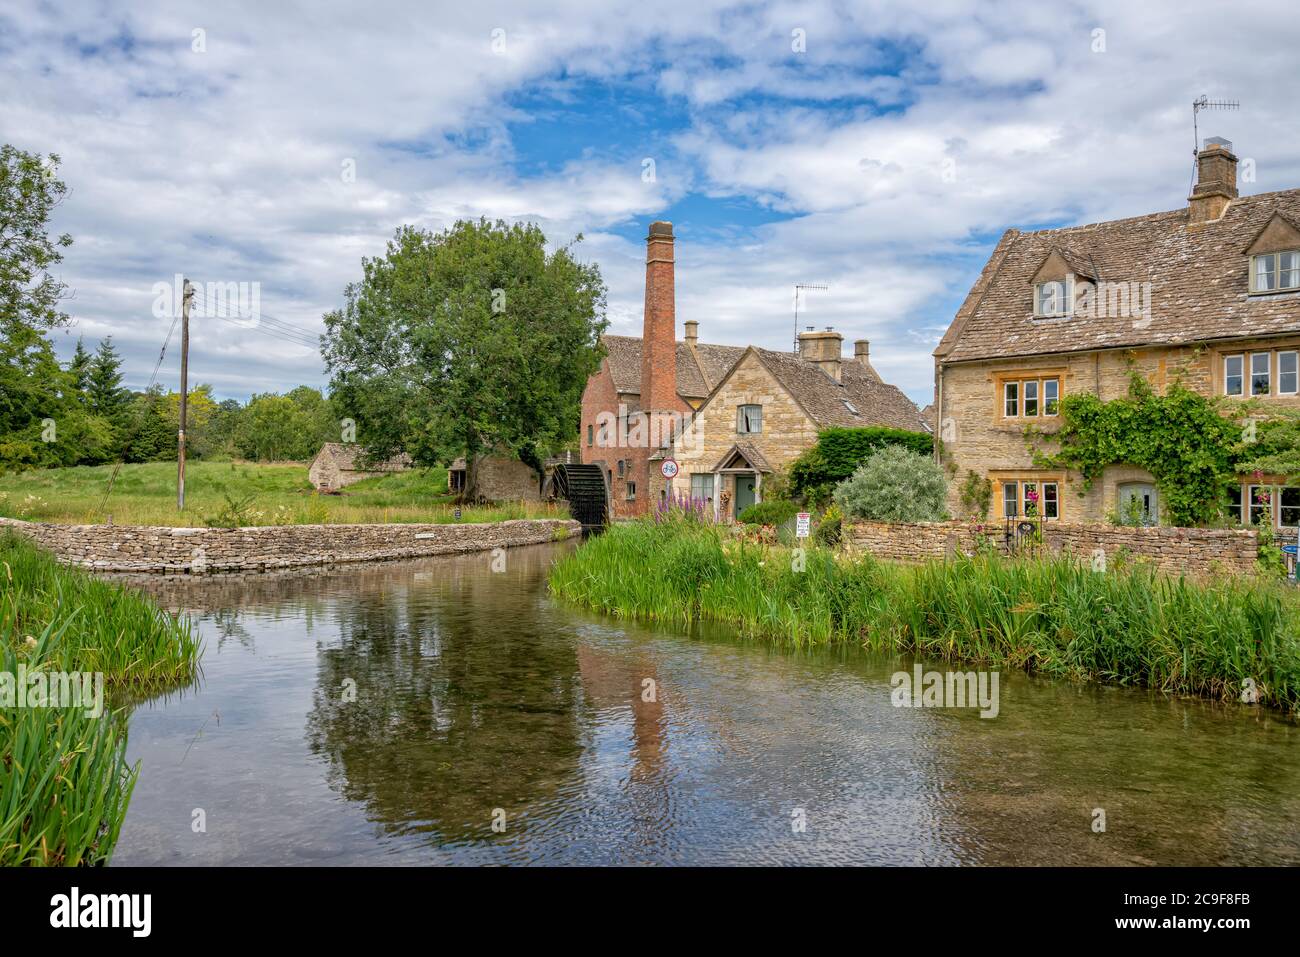 The Old Mill on the River Eye in Lower Slaughter, The Cotswolds, Gloucestershire, Regno Unito Foto Stock